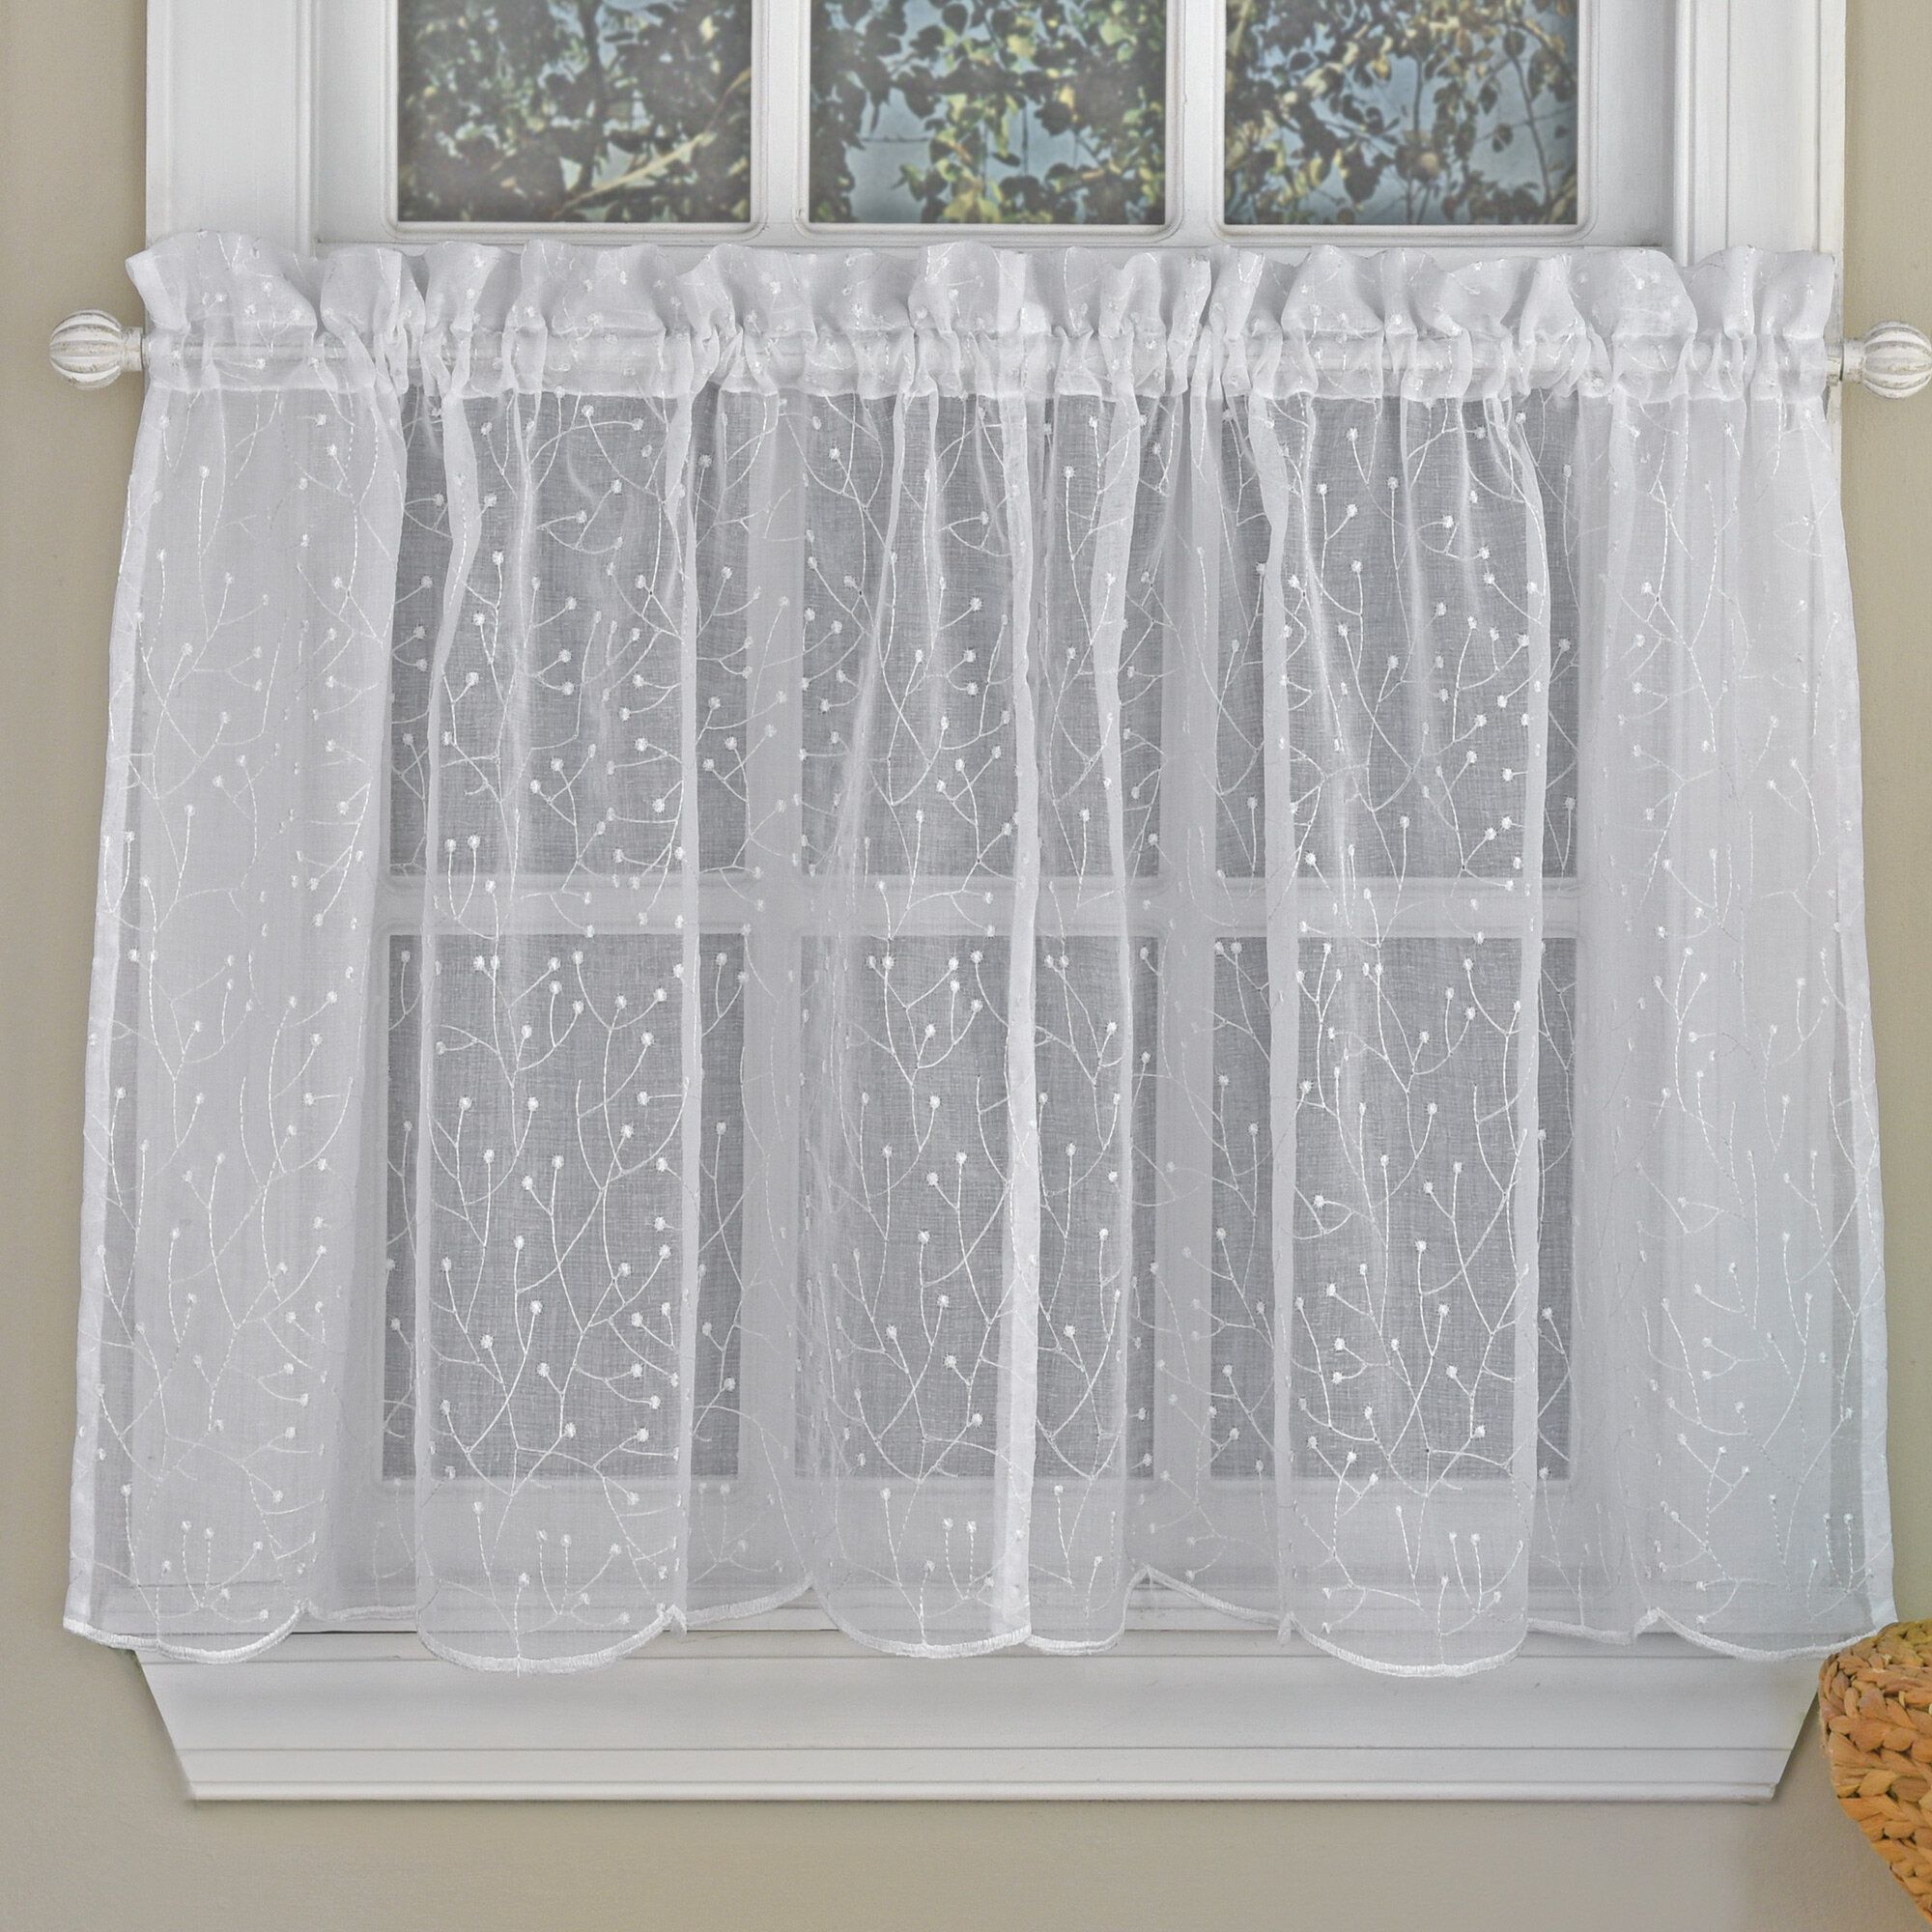 Howarth Floral Spray Semi Sheer Kitchen 55" Window Valance Throughout Floral Embroidered Sheer Kitchen Curtain Tiers, Swags And Valances (View 16 of 20)